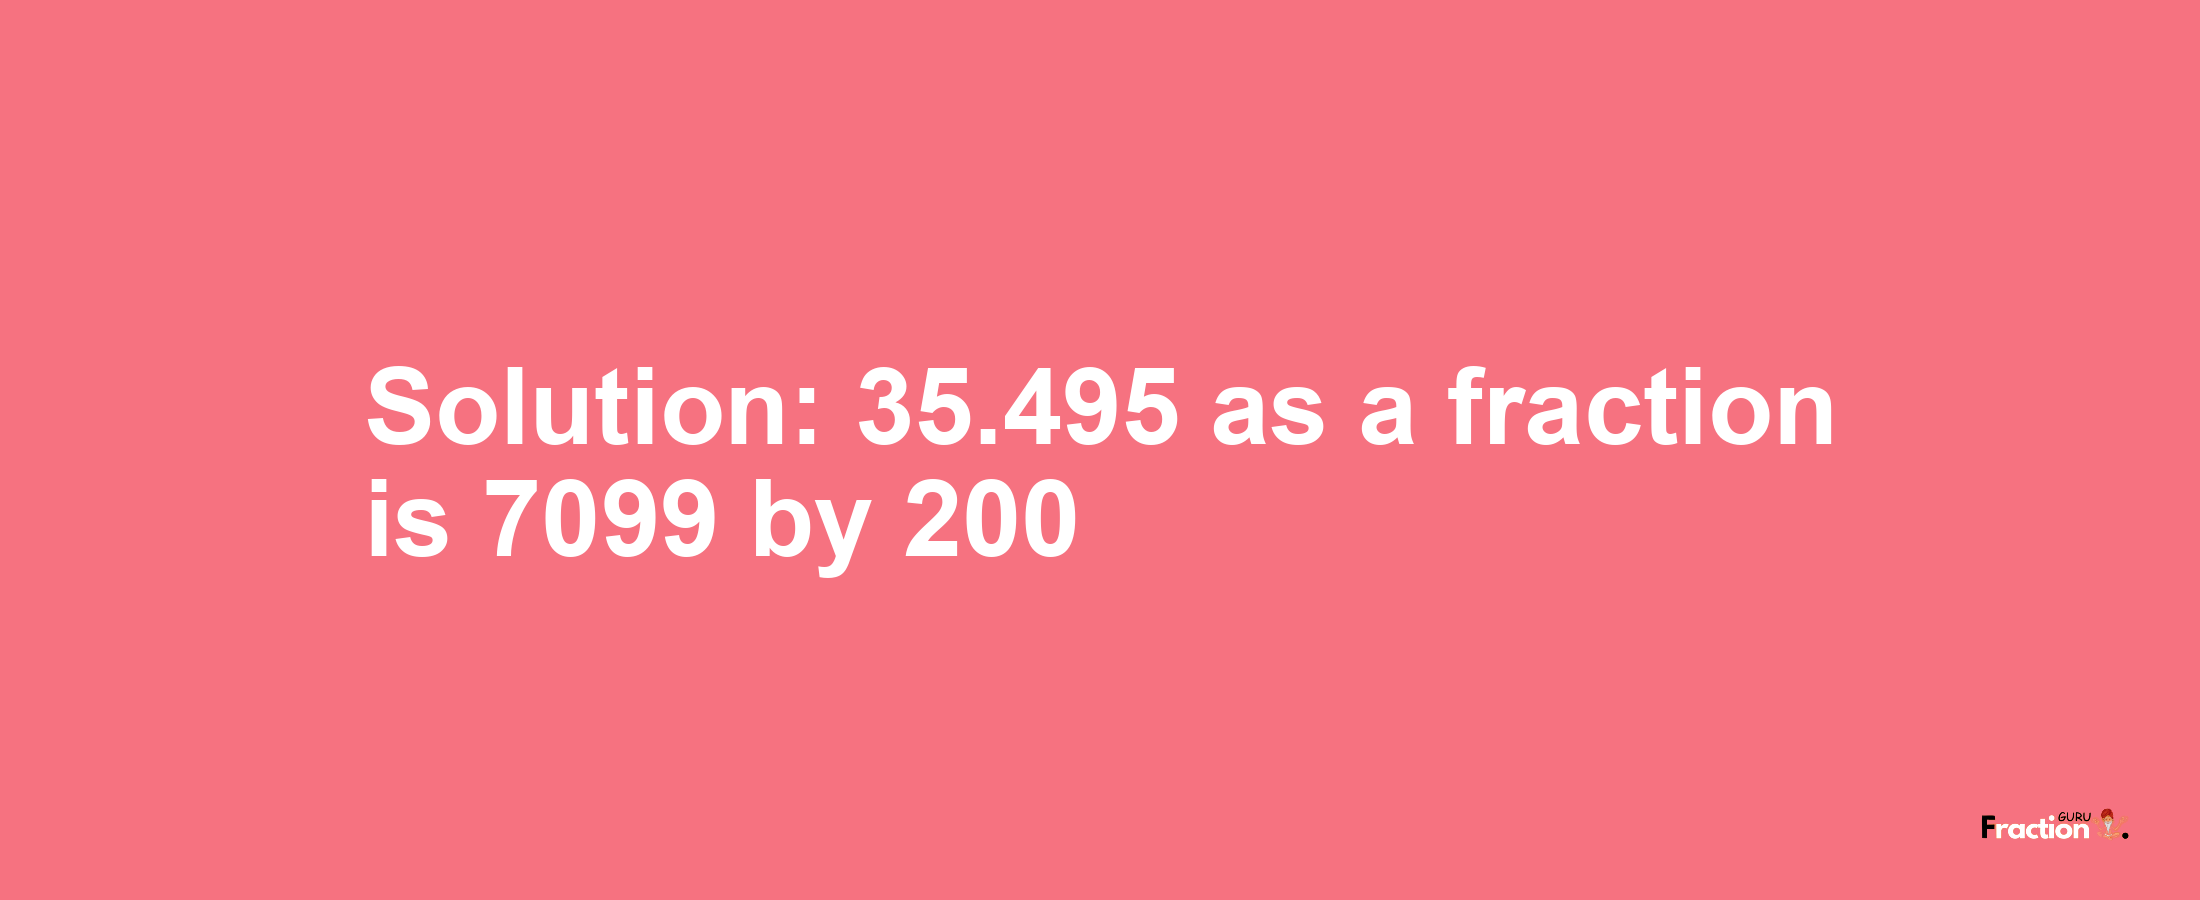 Solution:35.495 as a fraction is 7099/200